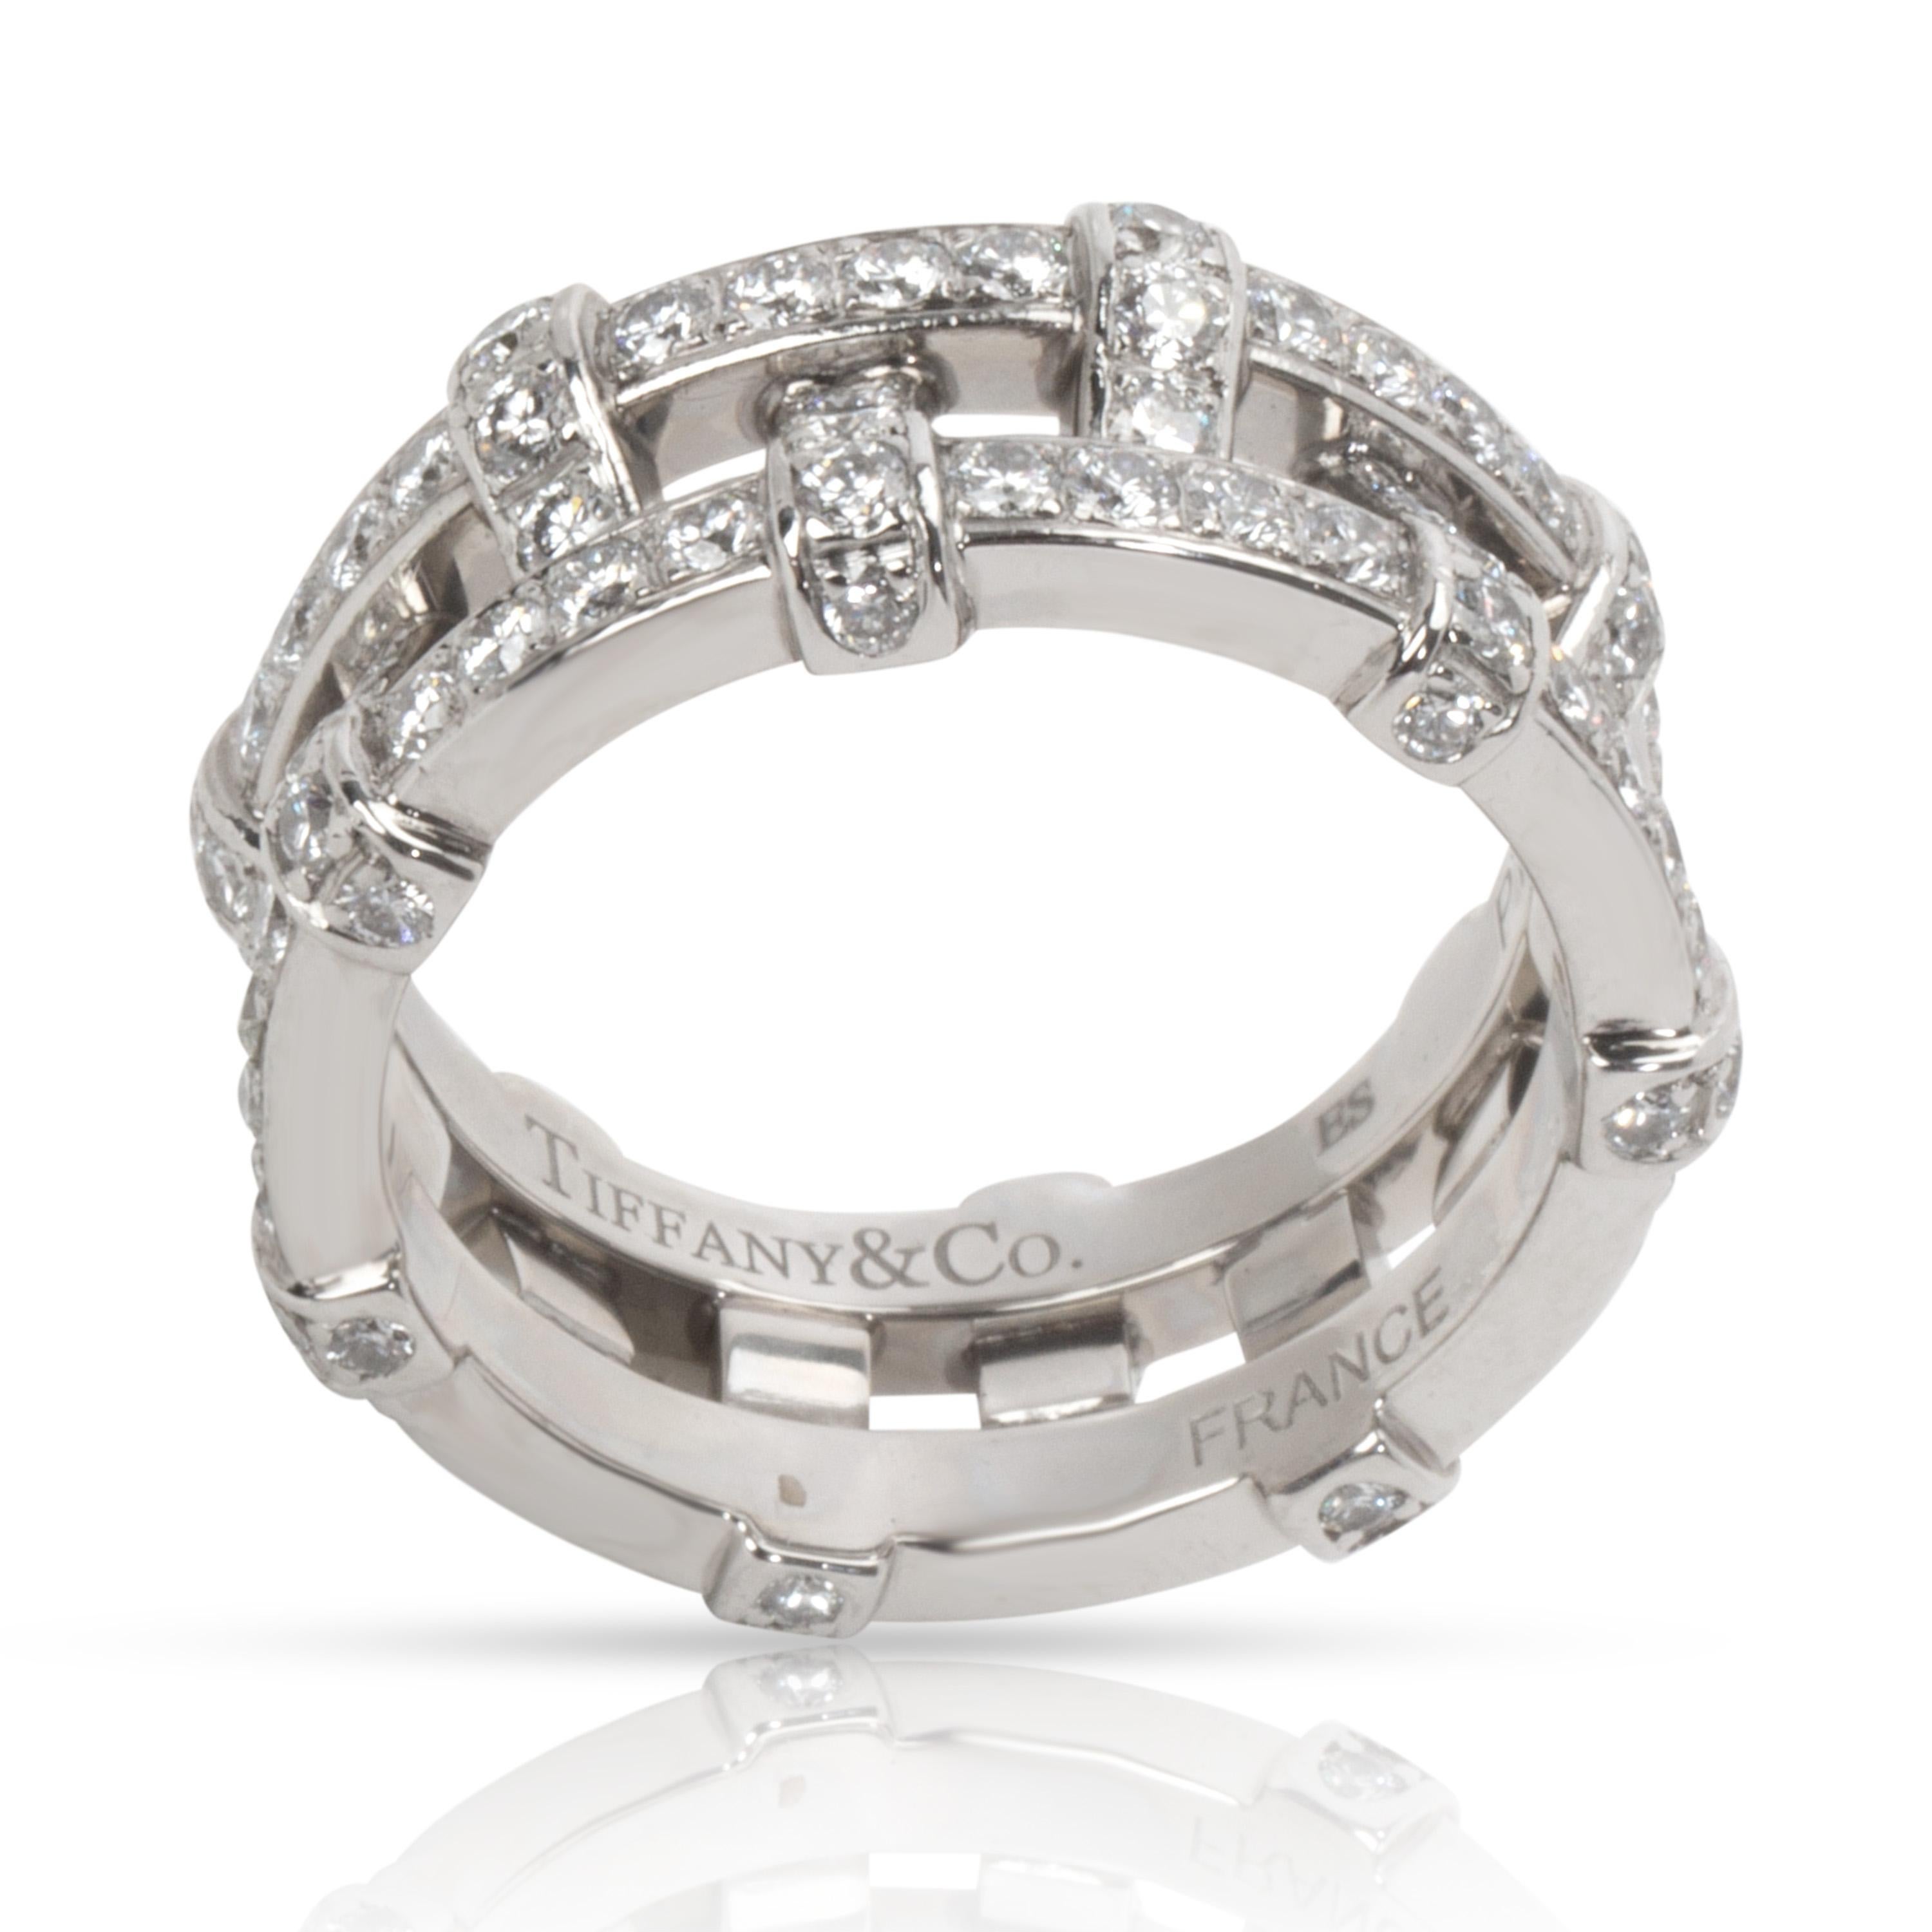 Tiffany & Co. Diamond Woven Double Eternity Bands, in Platinum (2/1 CTW)

PRIMARY DETAILS
SKU: 101424
Listing Title: Tiffany & Co. Diamond Woven Double Eternity Bands, in Platinum (2/1 CTW)
Condition Description: In excellent condition and recently